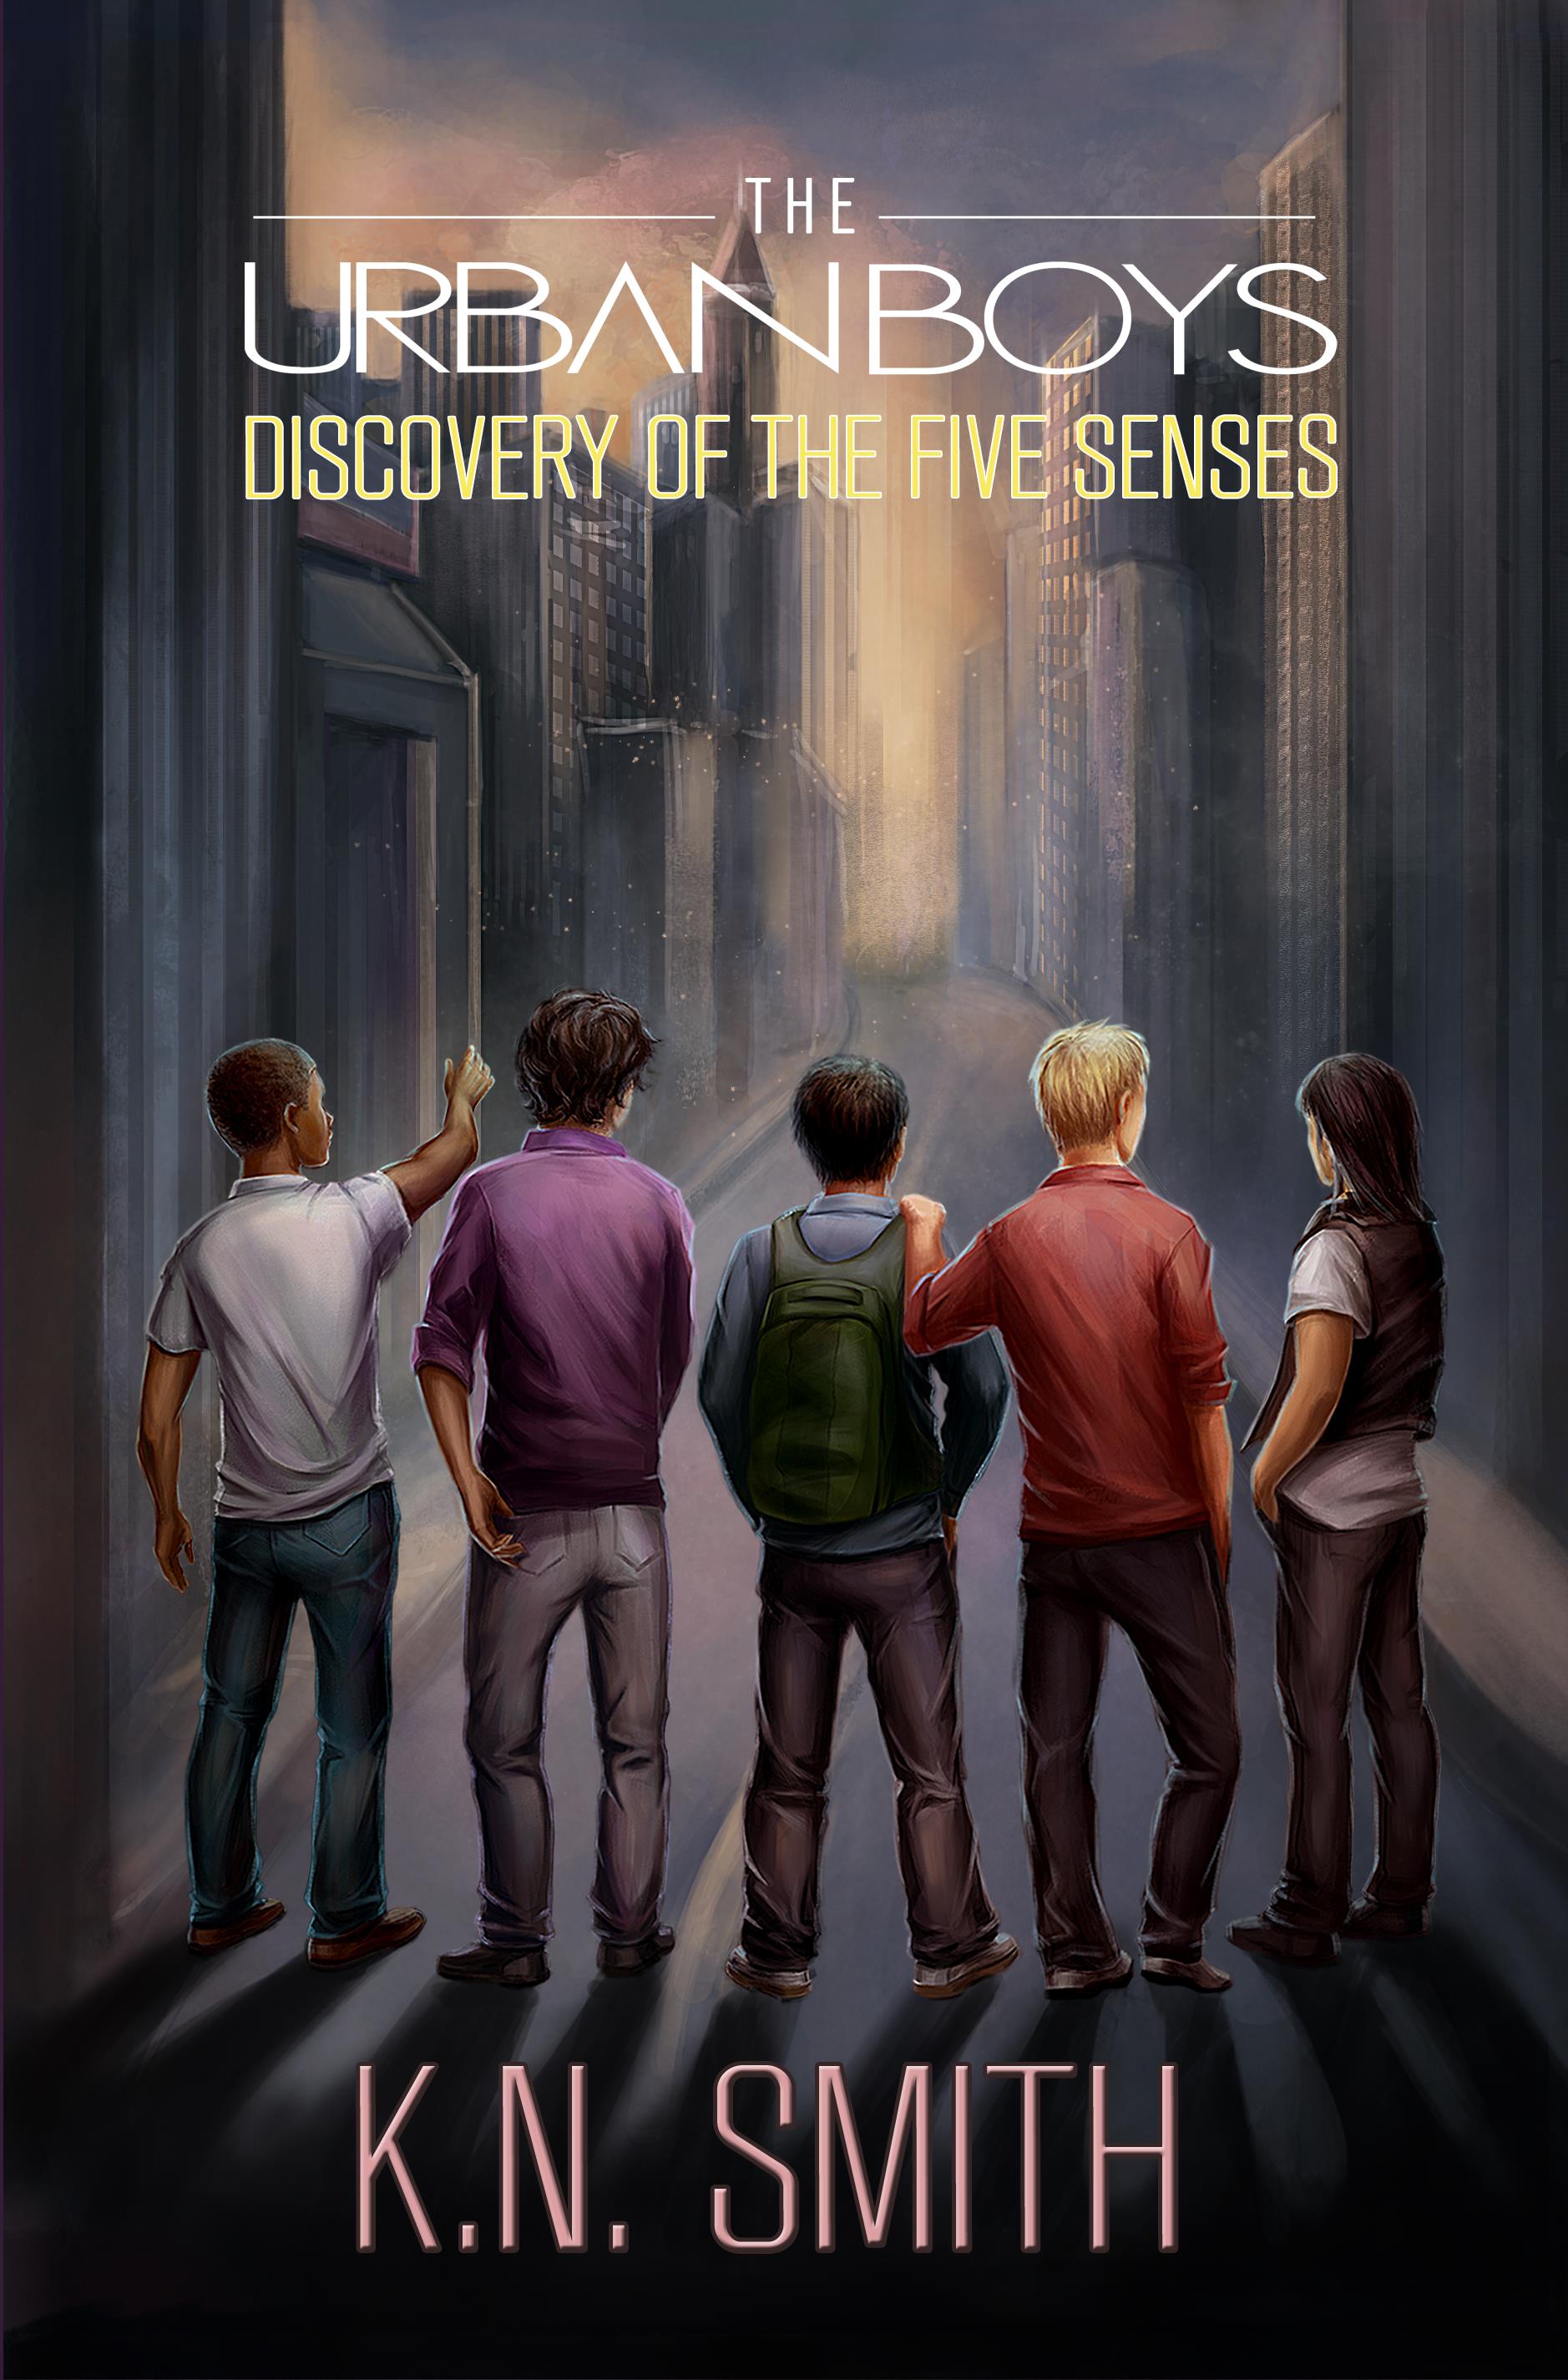 Dissovery of the Five Senses by K.N. Smith